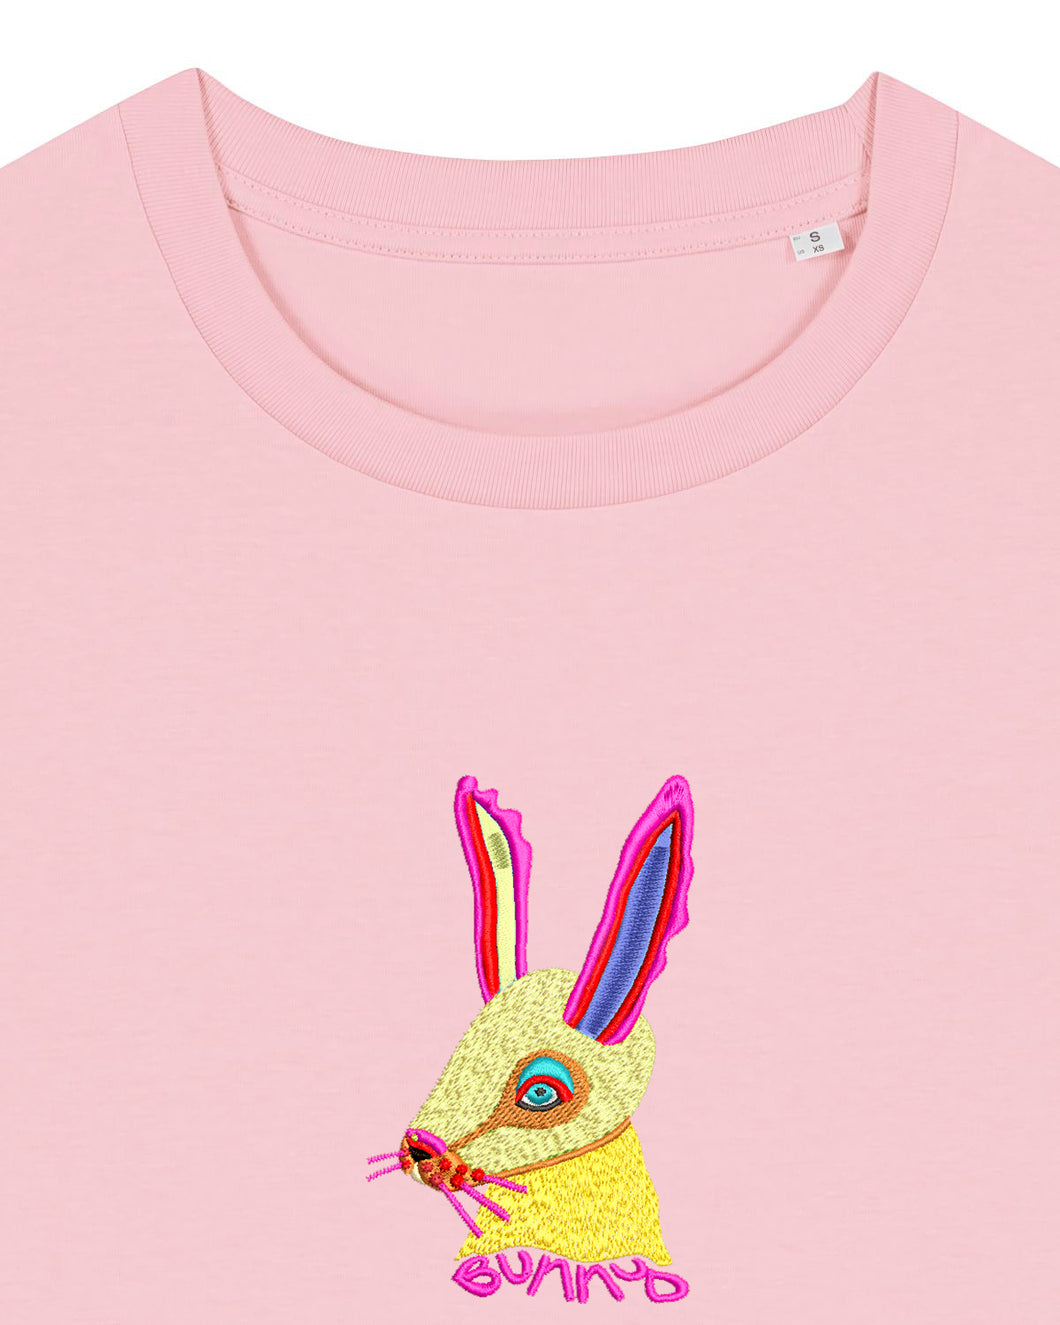 BUNNY 🐰- Embroidered WOMEN'S T-SHIRT